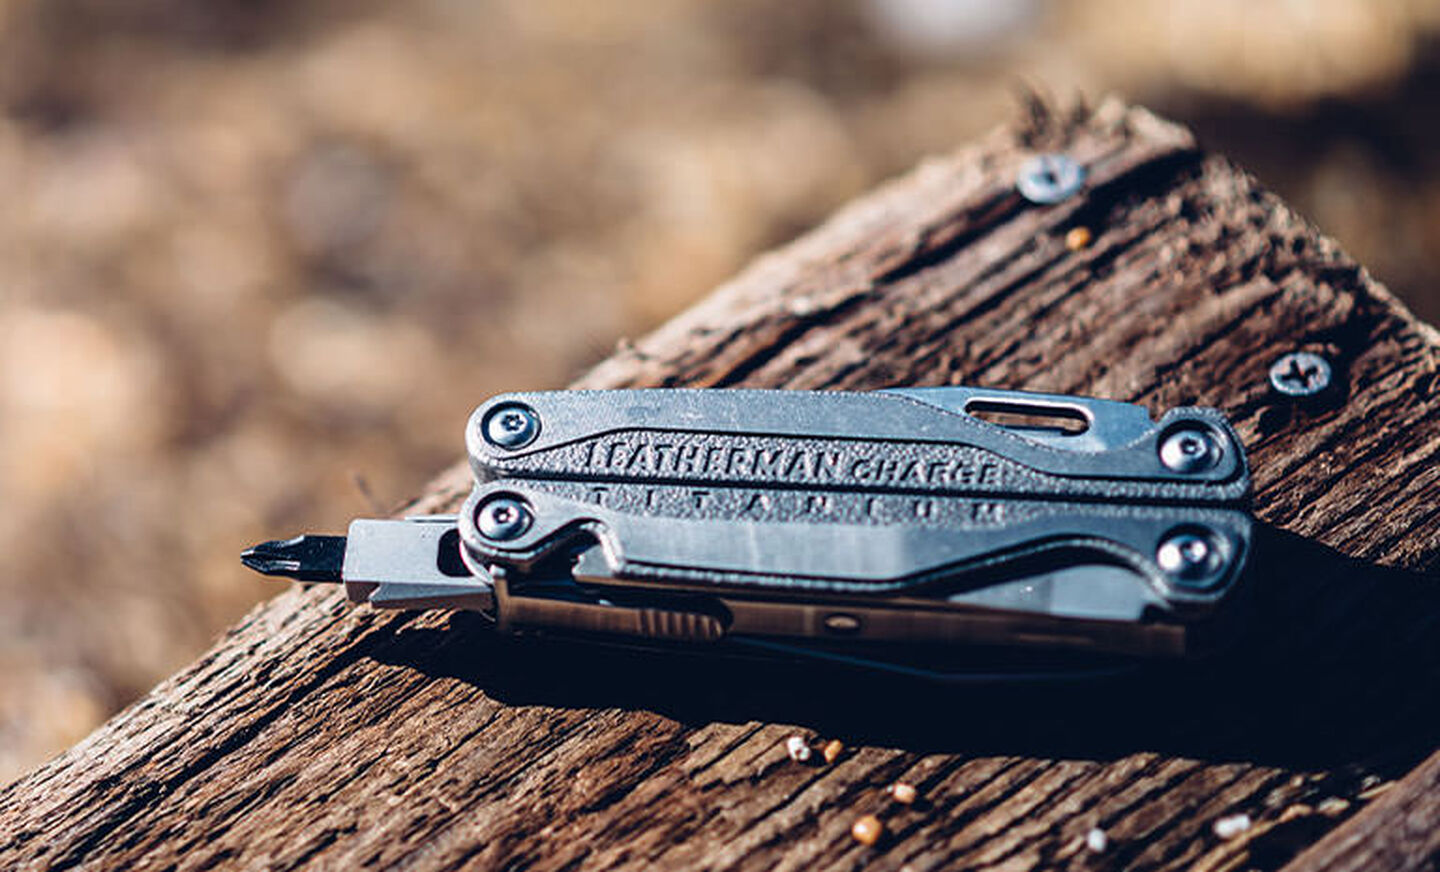 Leatherman Charge+ TTI laying on piece of wood under sunlight